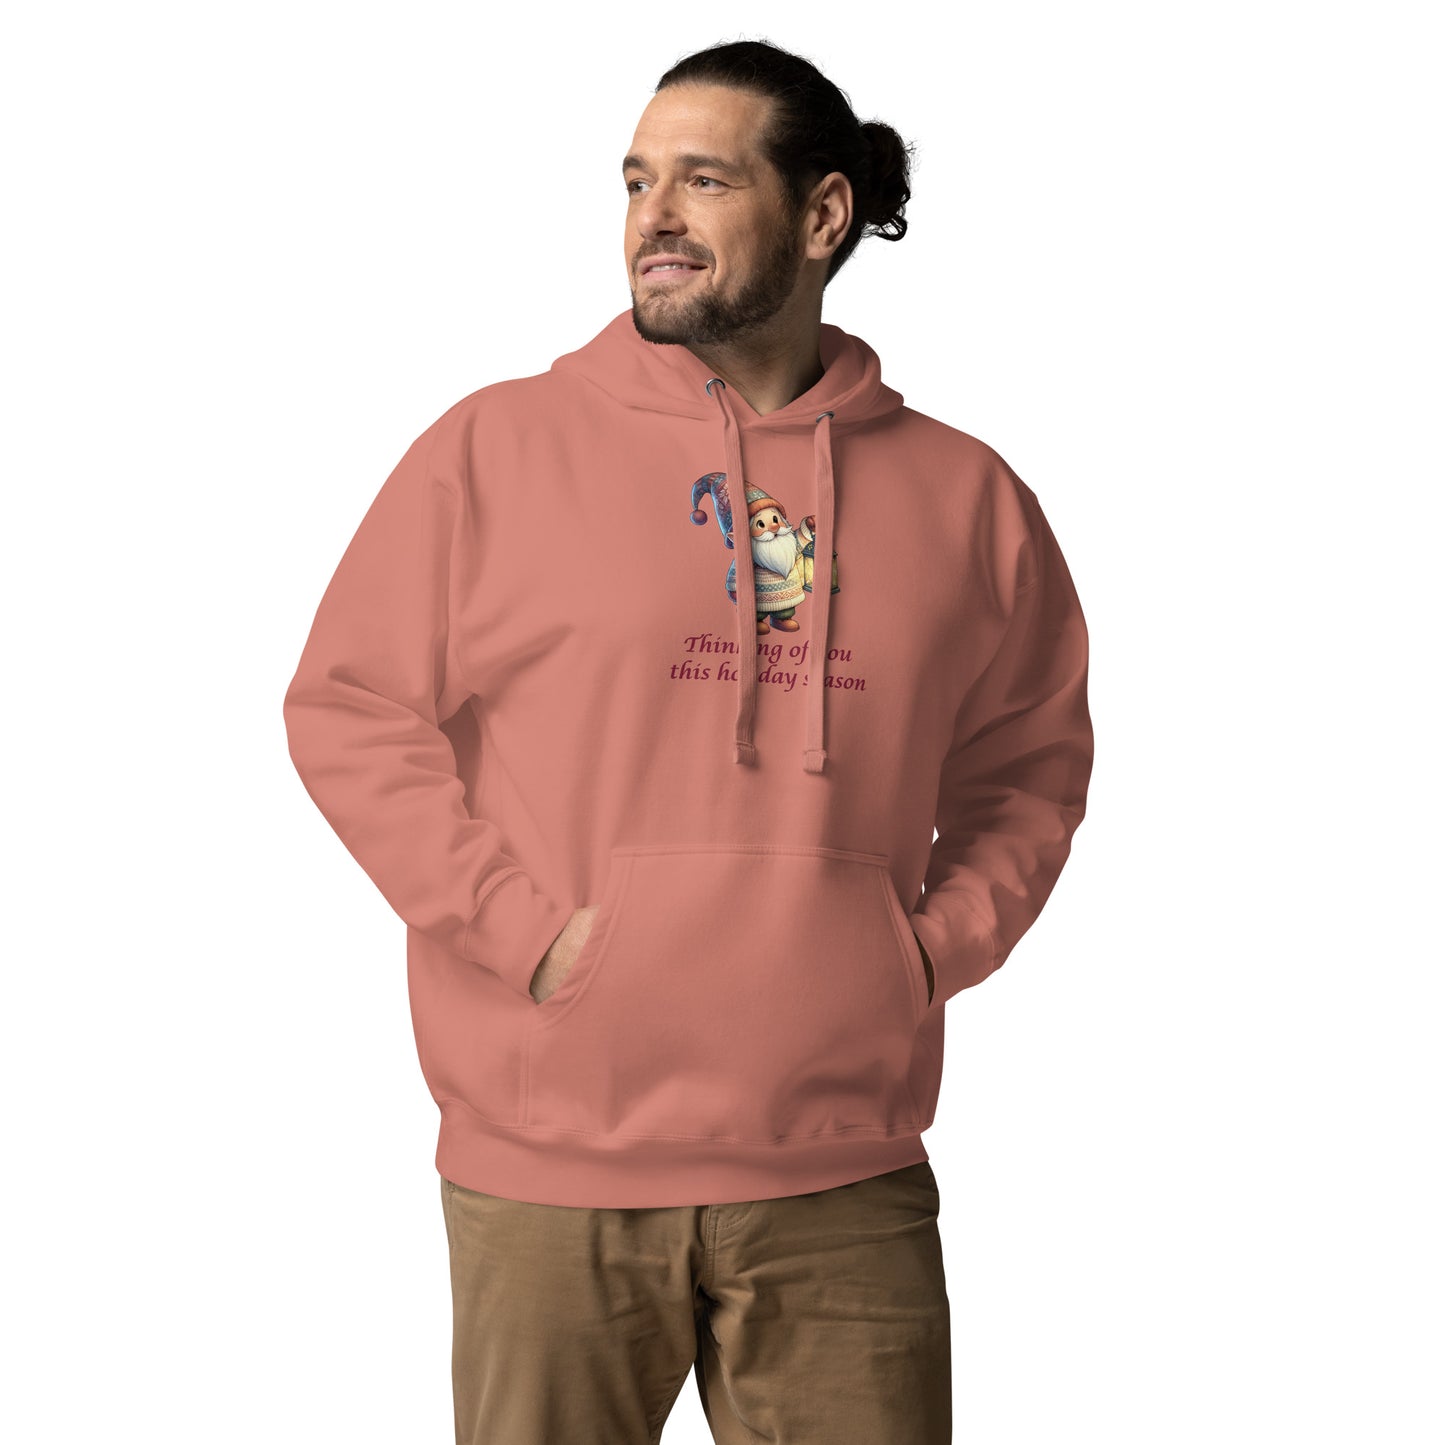 Unisex Hoodie - Thinking of You Gnome